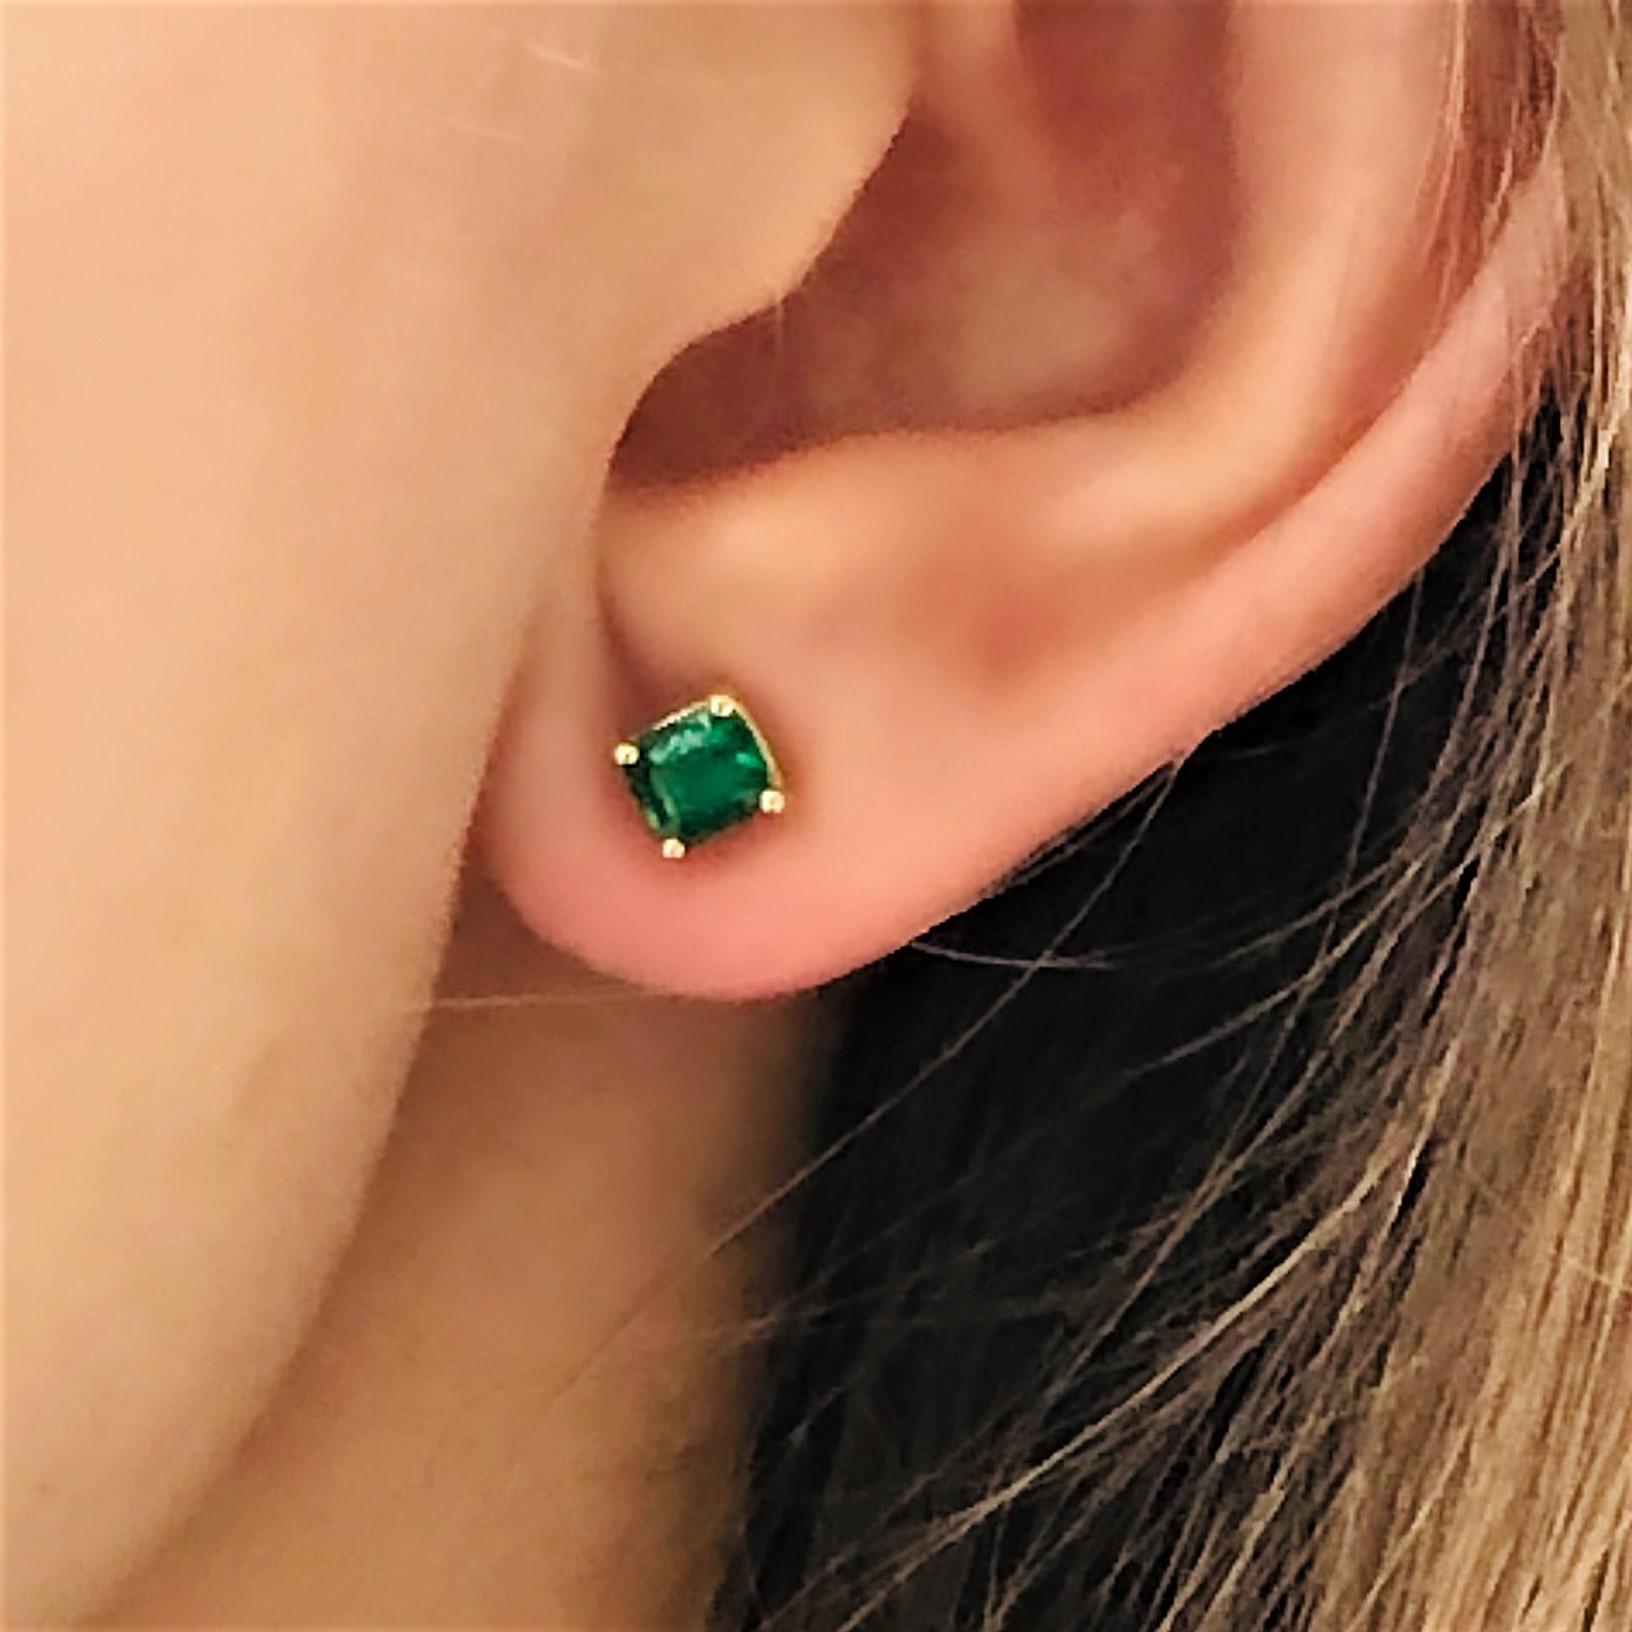 14 karats yellow gold 5-millimeter Colombian emerald stud earrings 
Emerald weighing 0.80 carats
Width of the earrings 5.5 millimeter 
New Earrings
Our design team select gemstones for their quality, aesthetic beauty and sale value of the featured